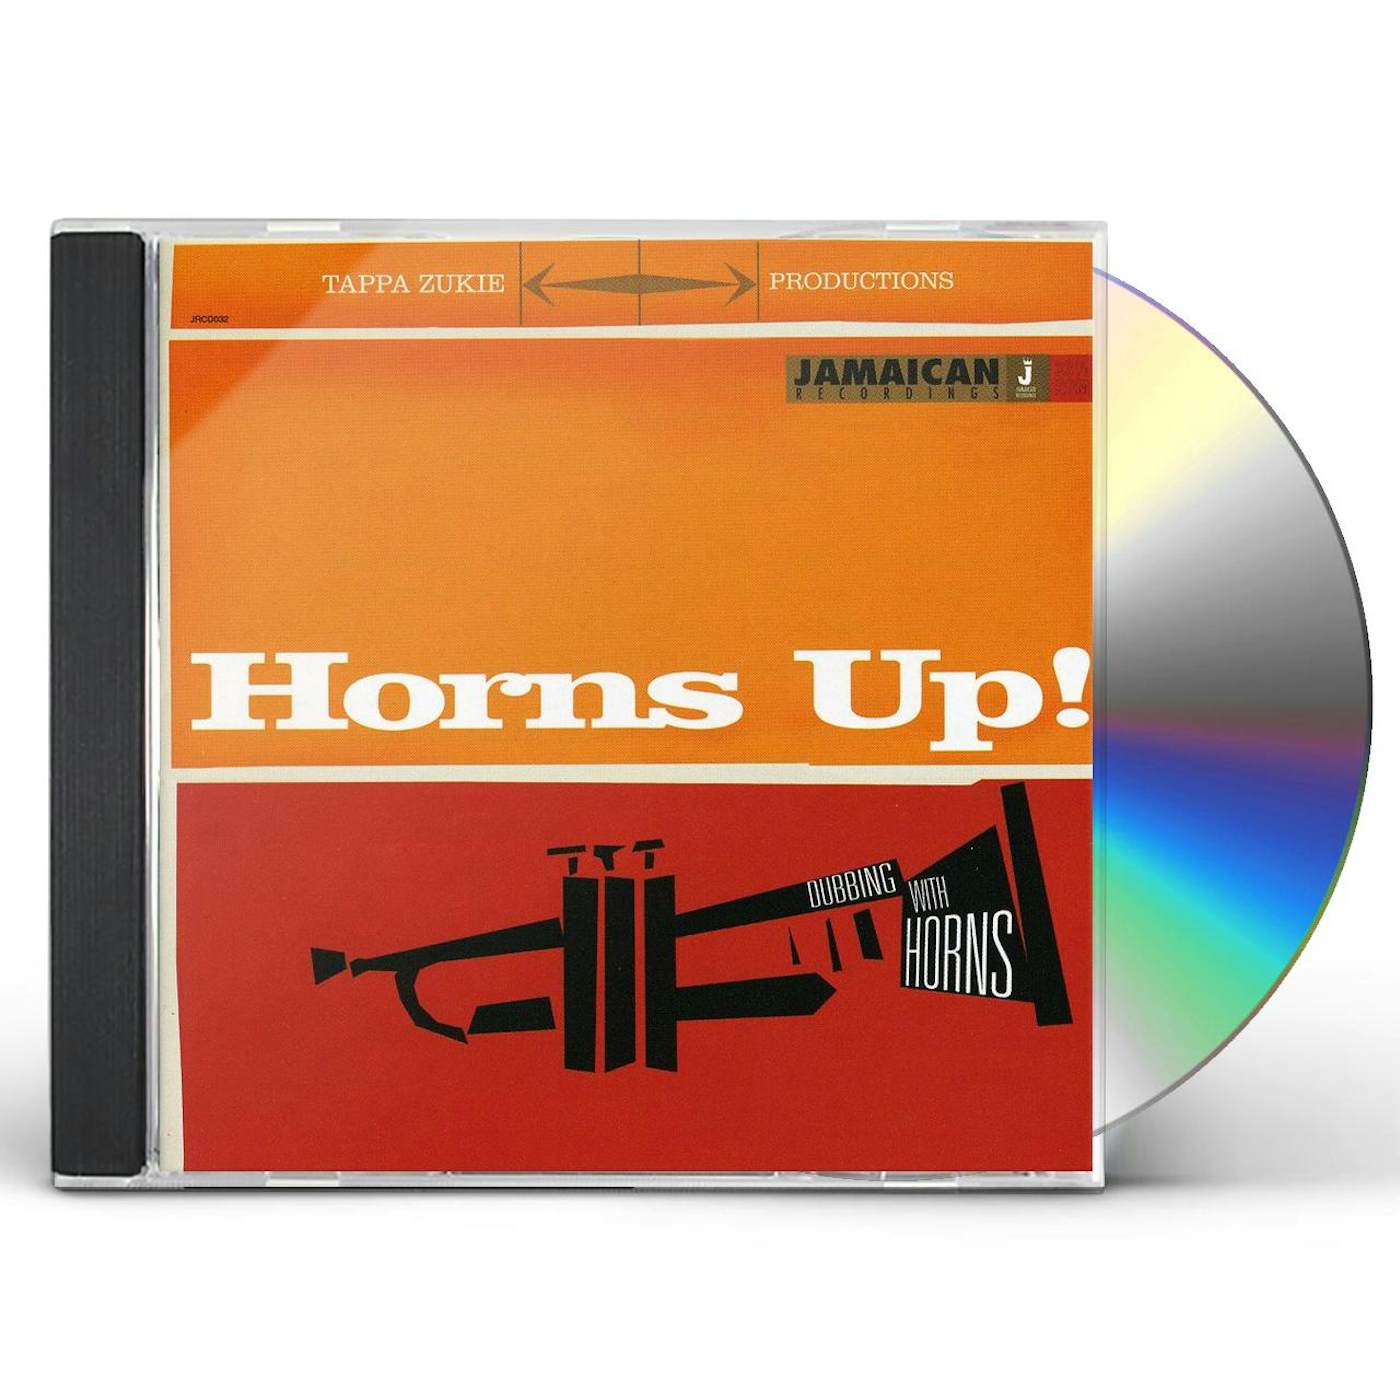 Tappa Zukie HORNS UP DUBBING WITH HORNS CD